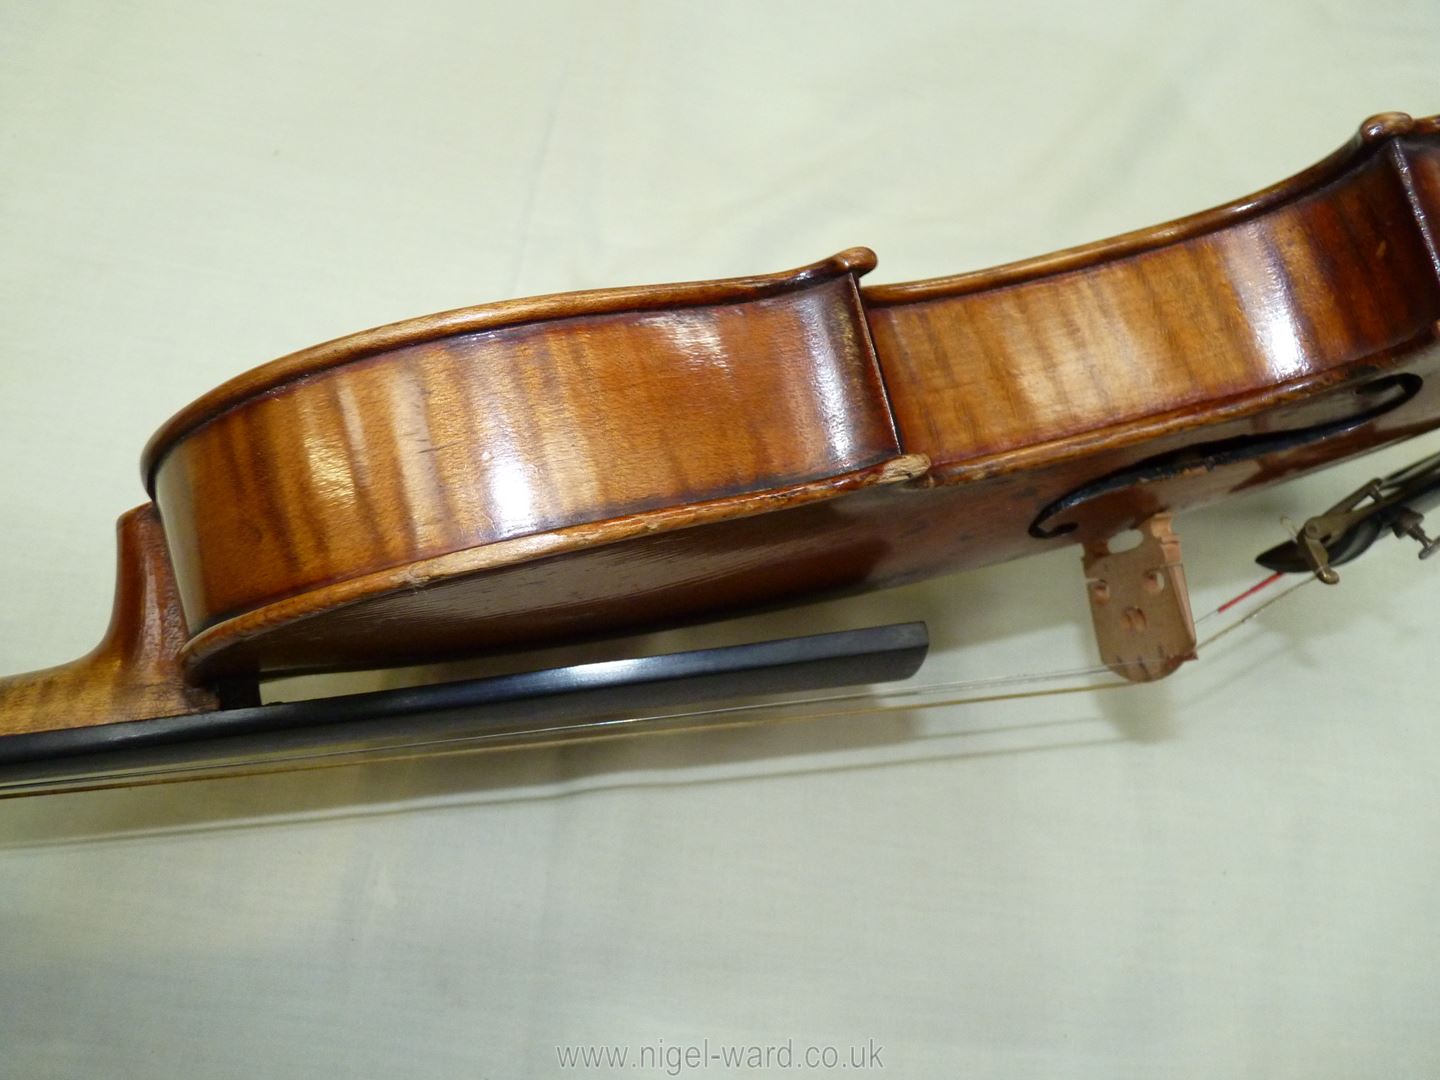 An antique violin having a well-carved scroll and nicely figured body including the back, - Image 21 of 49